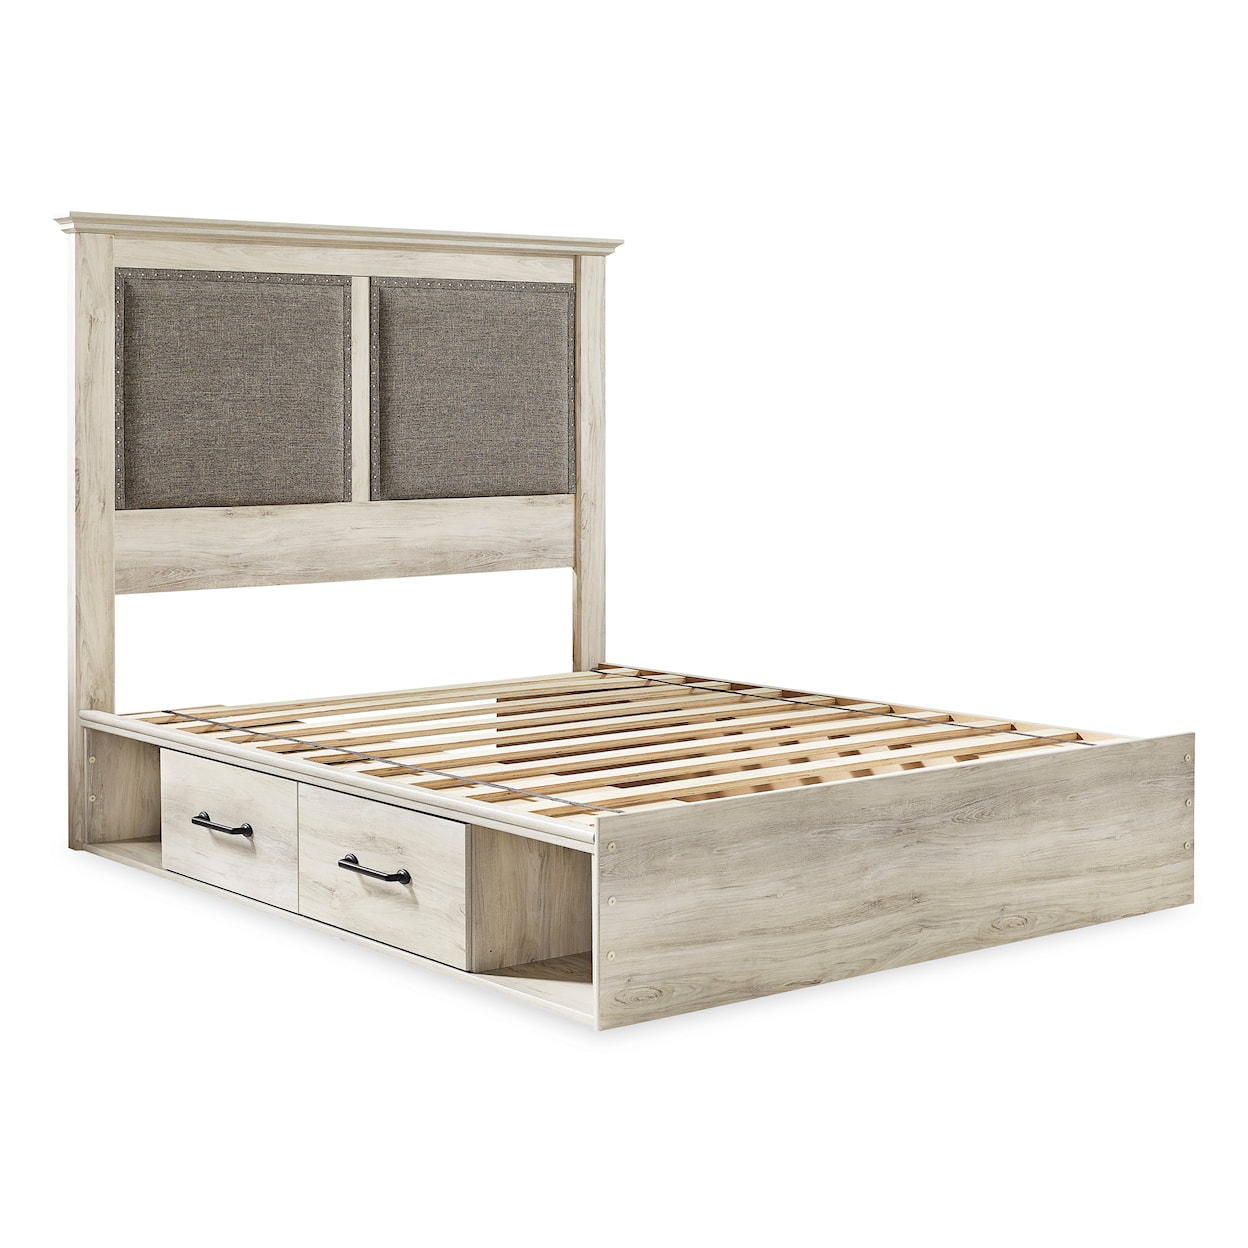 StyleLine APOLLO2 DYLAN King Upholstered Bed w/ 4 Drawers